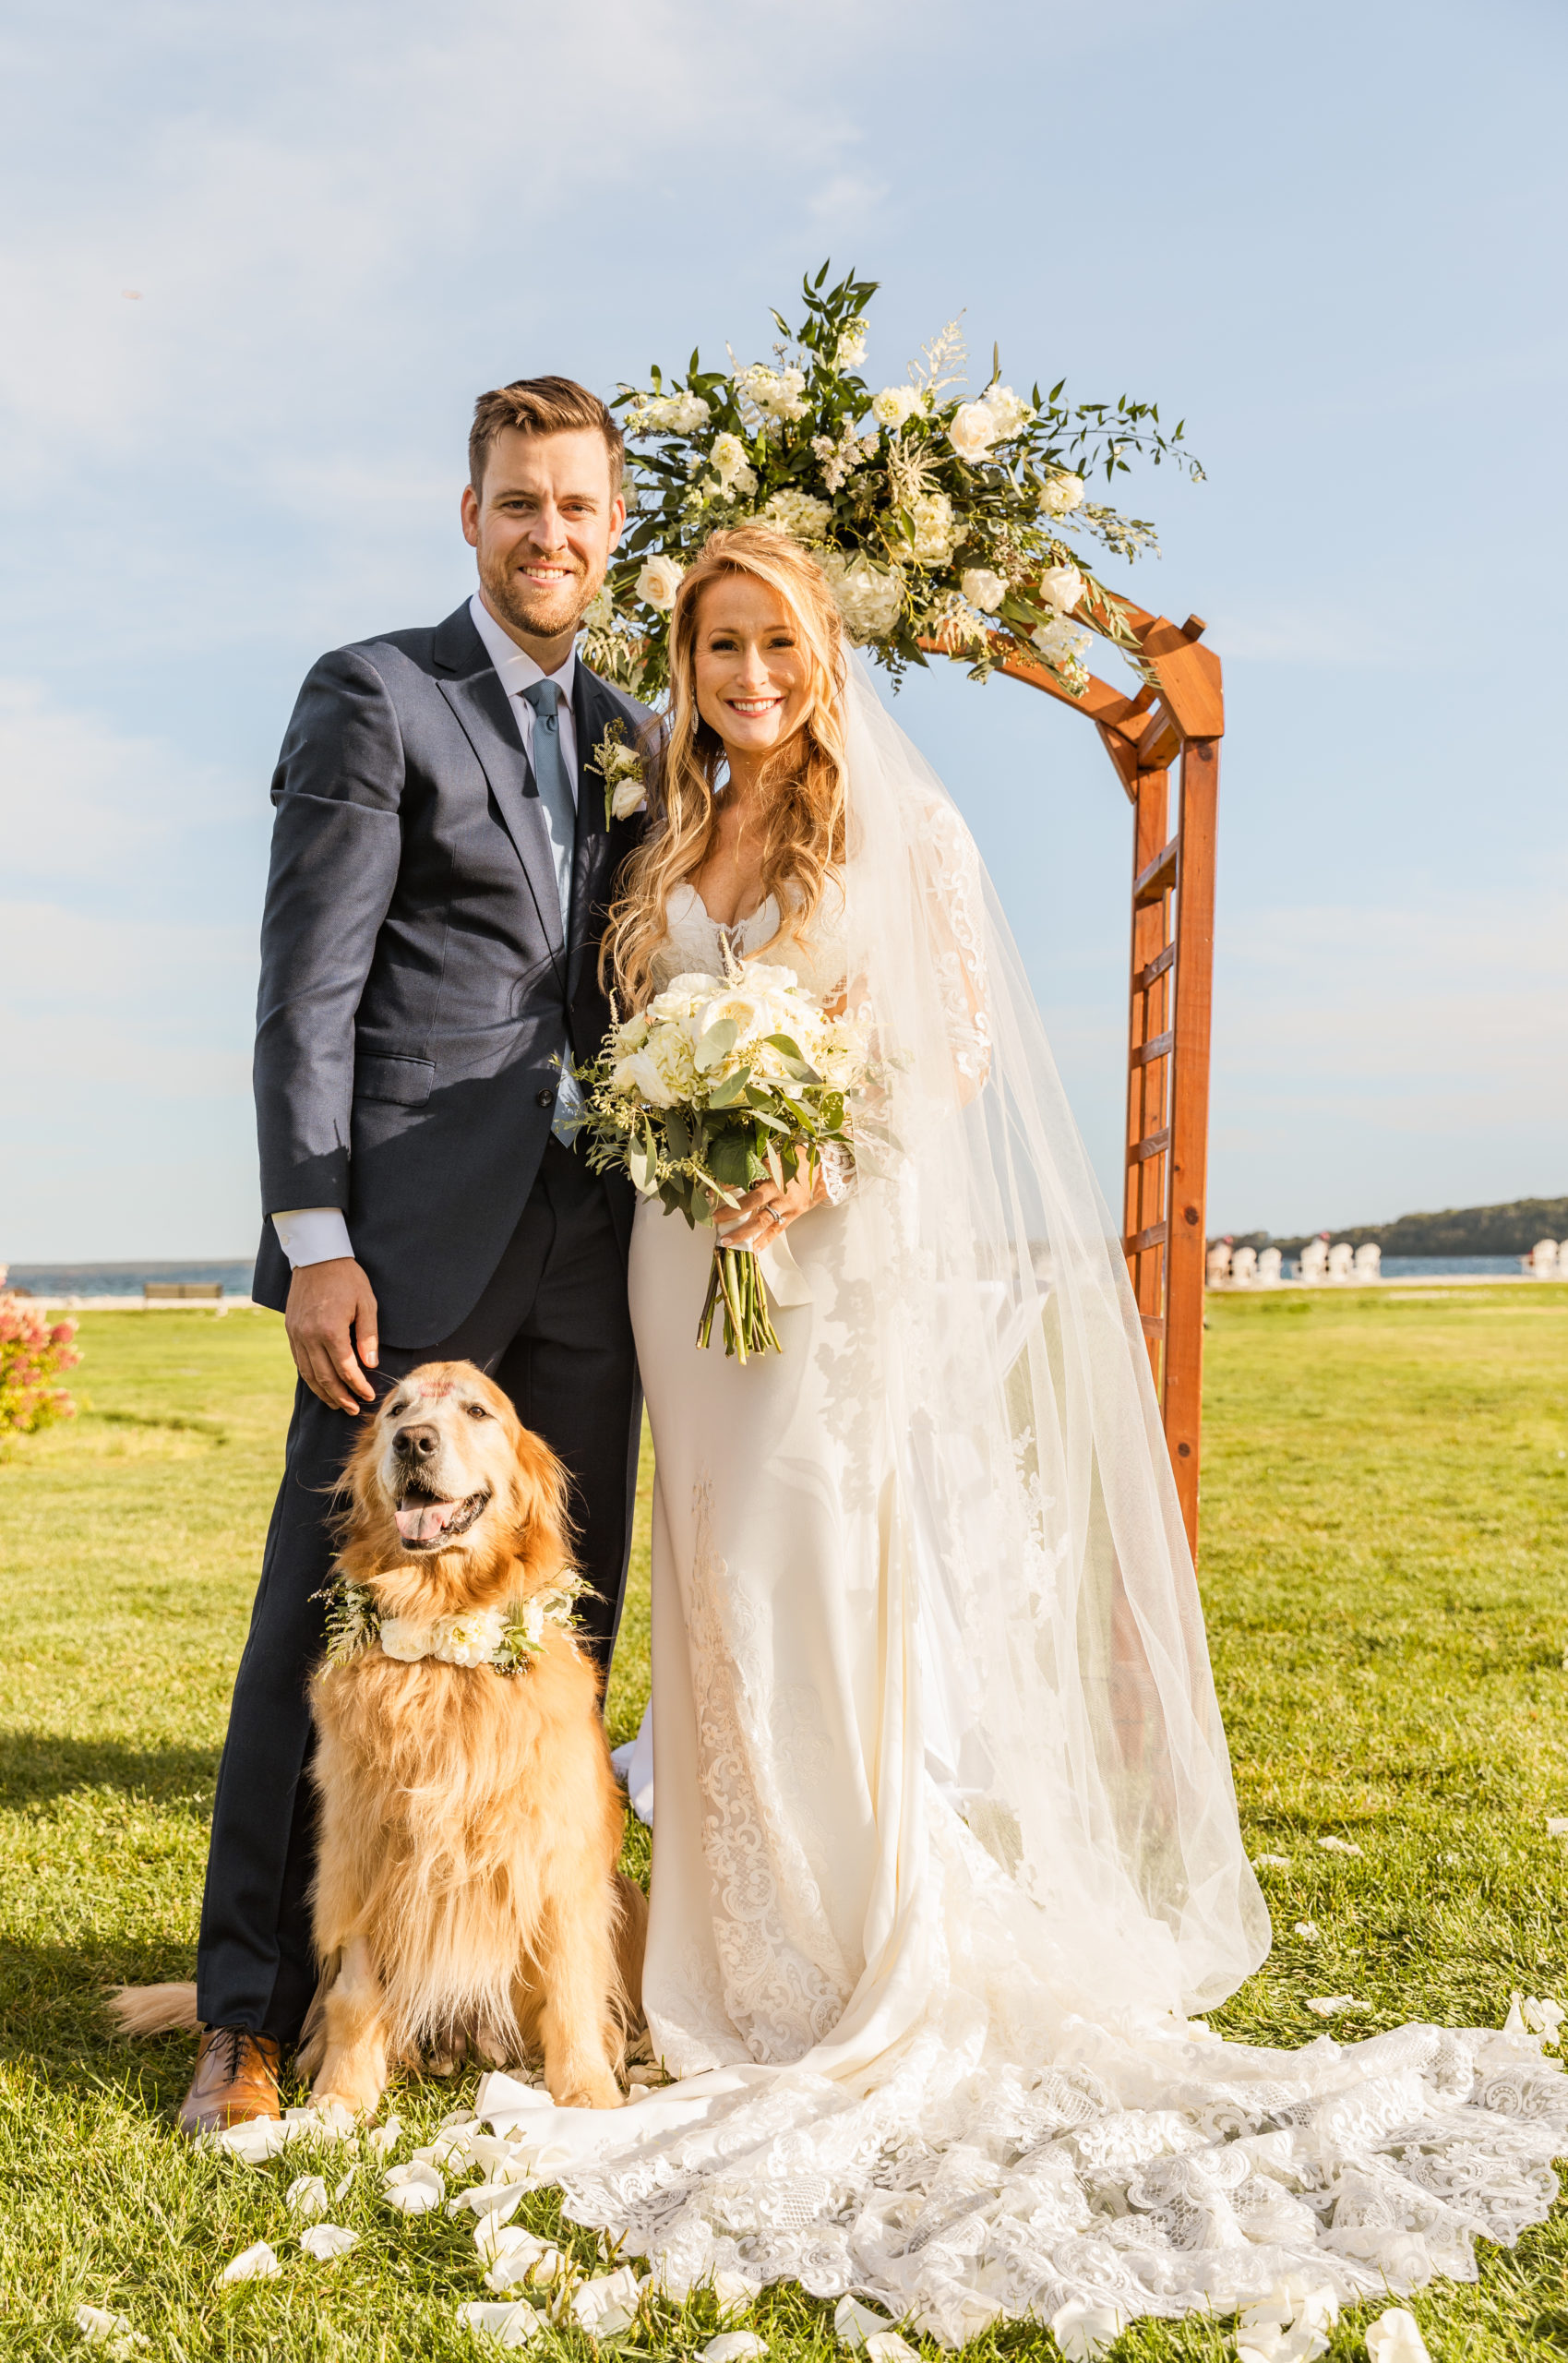 Bride and groom posting with golden retriever on Mackinac Island lawn